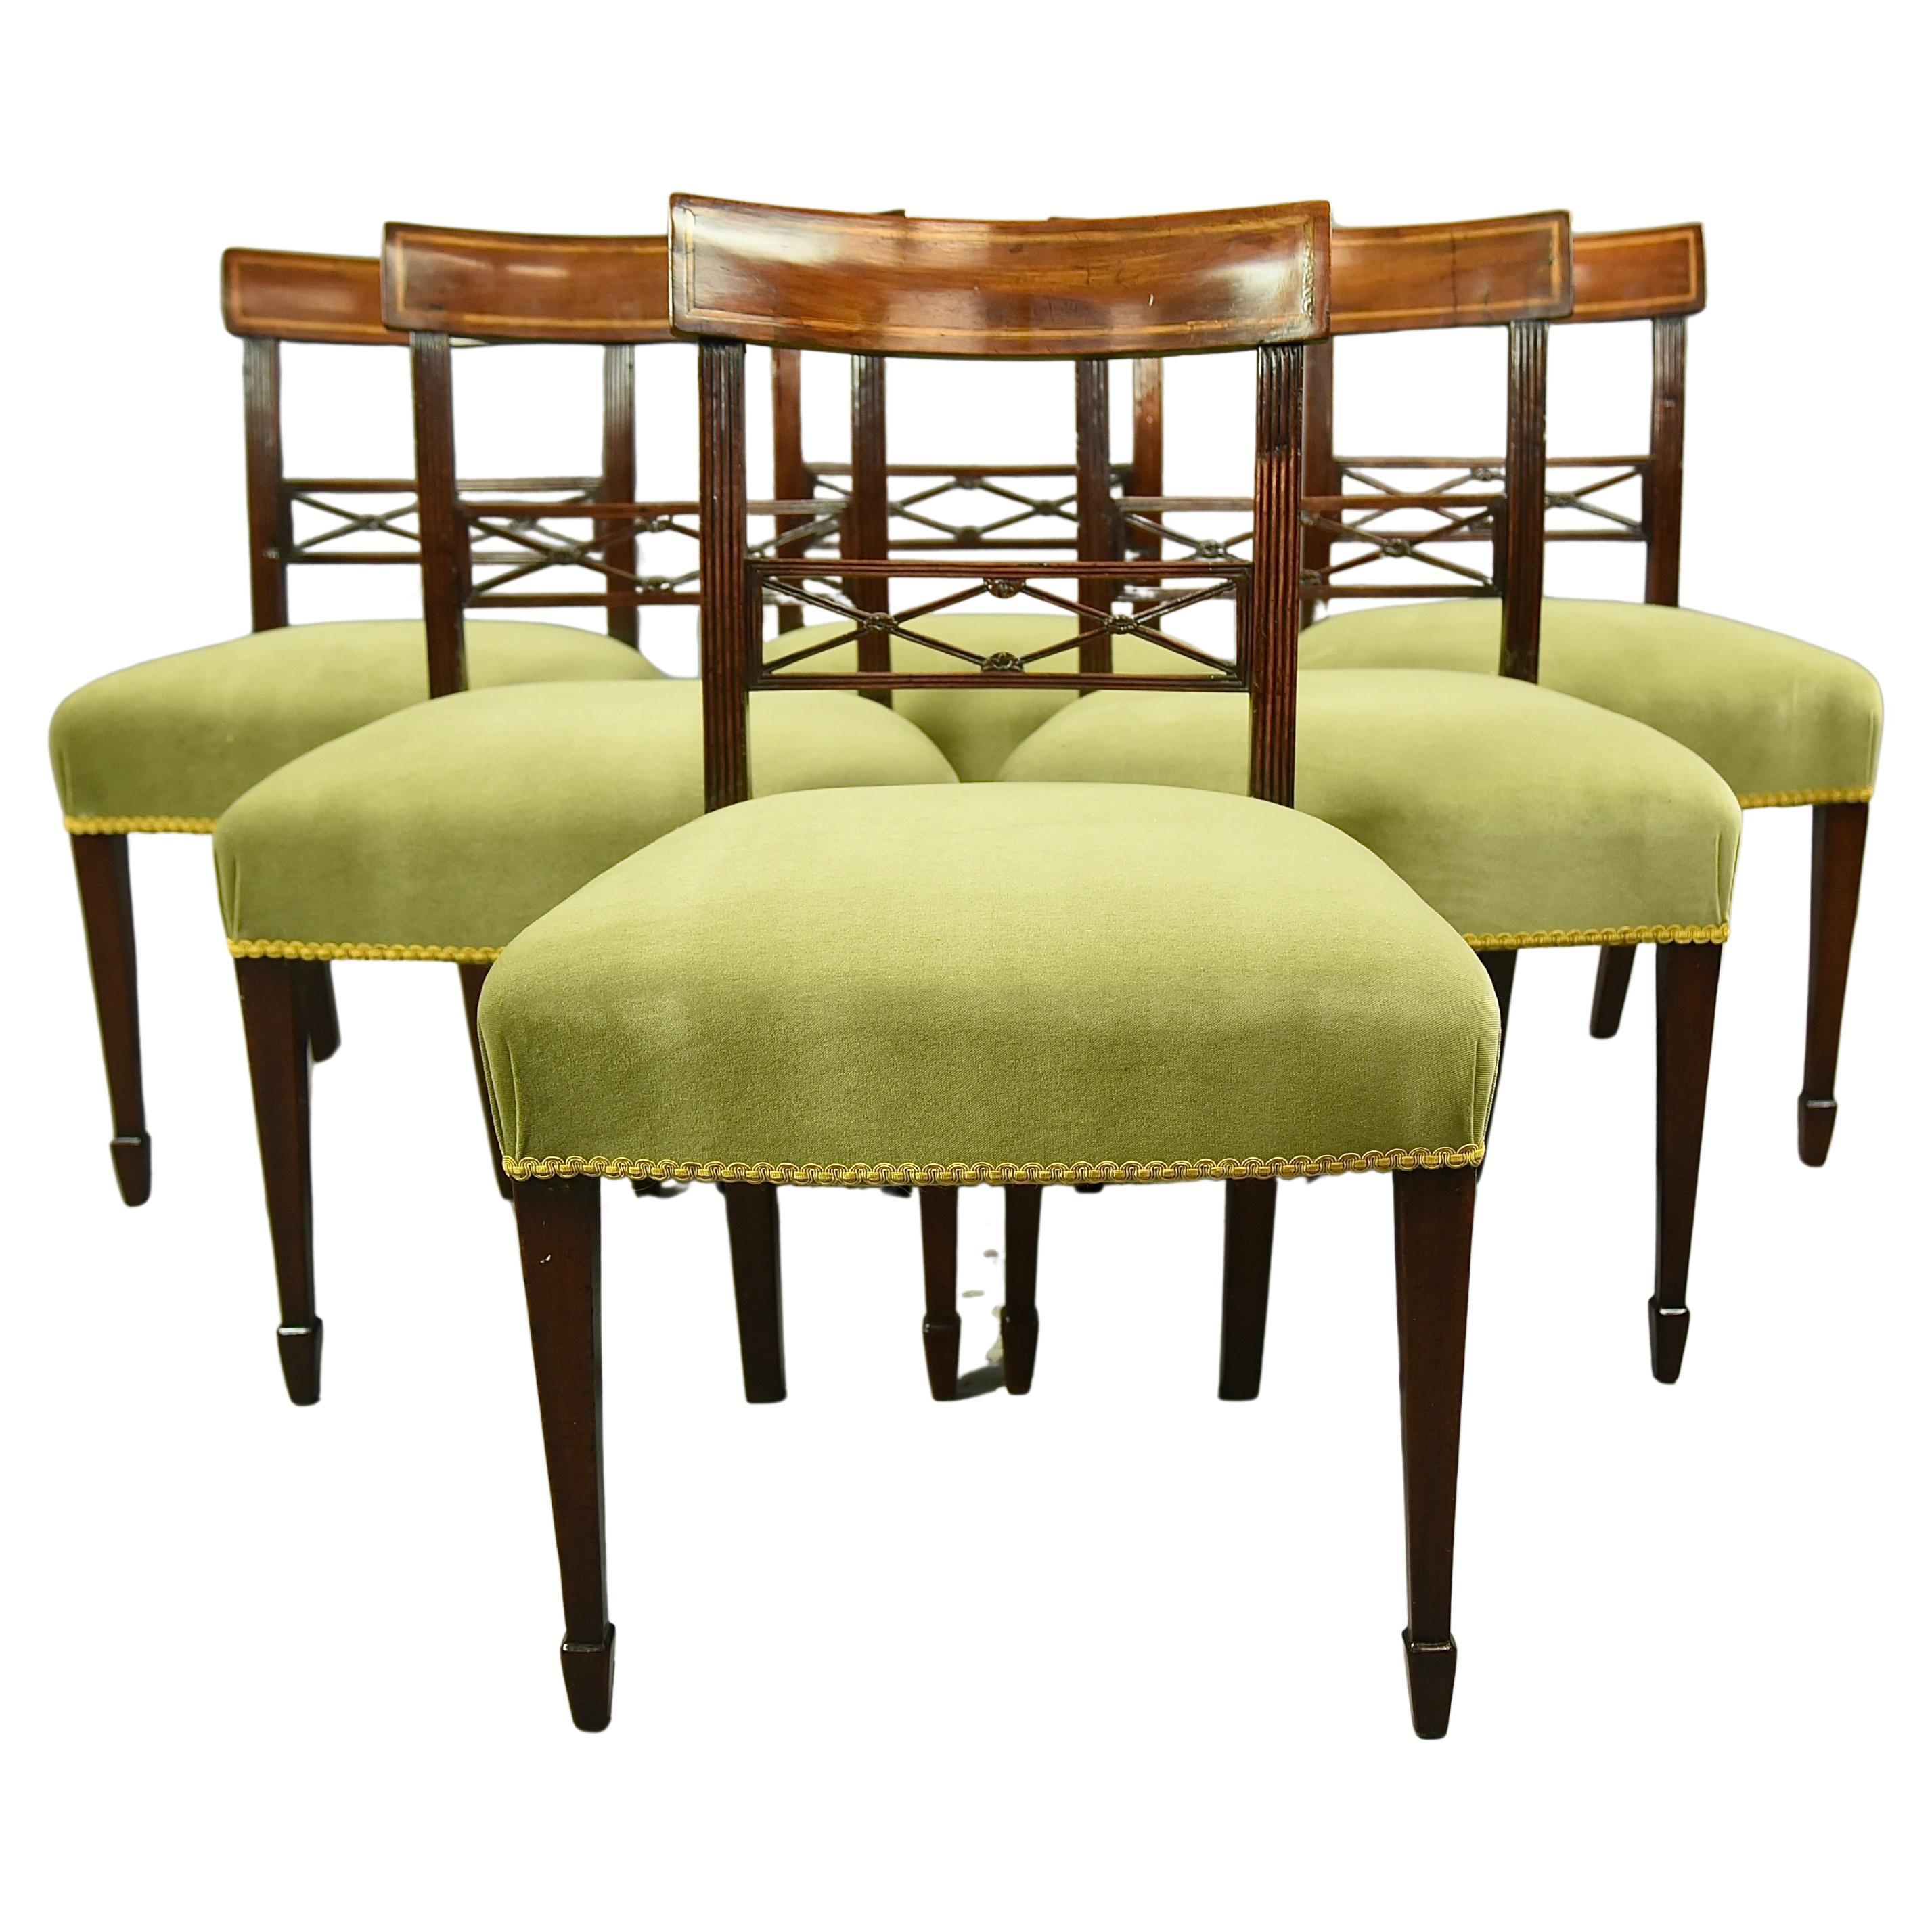 19th century Antique set of 6 Regency dining chairs 